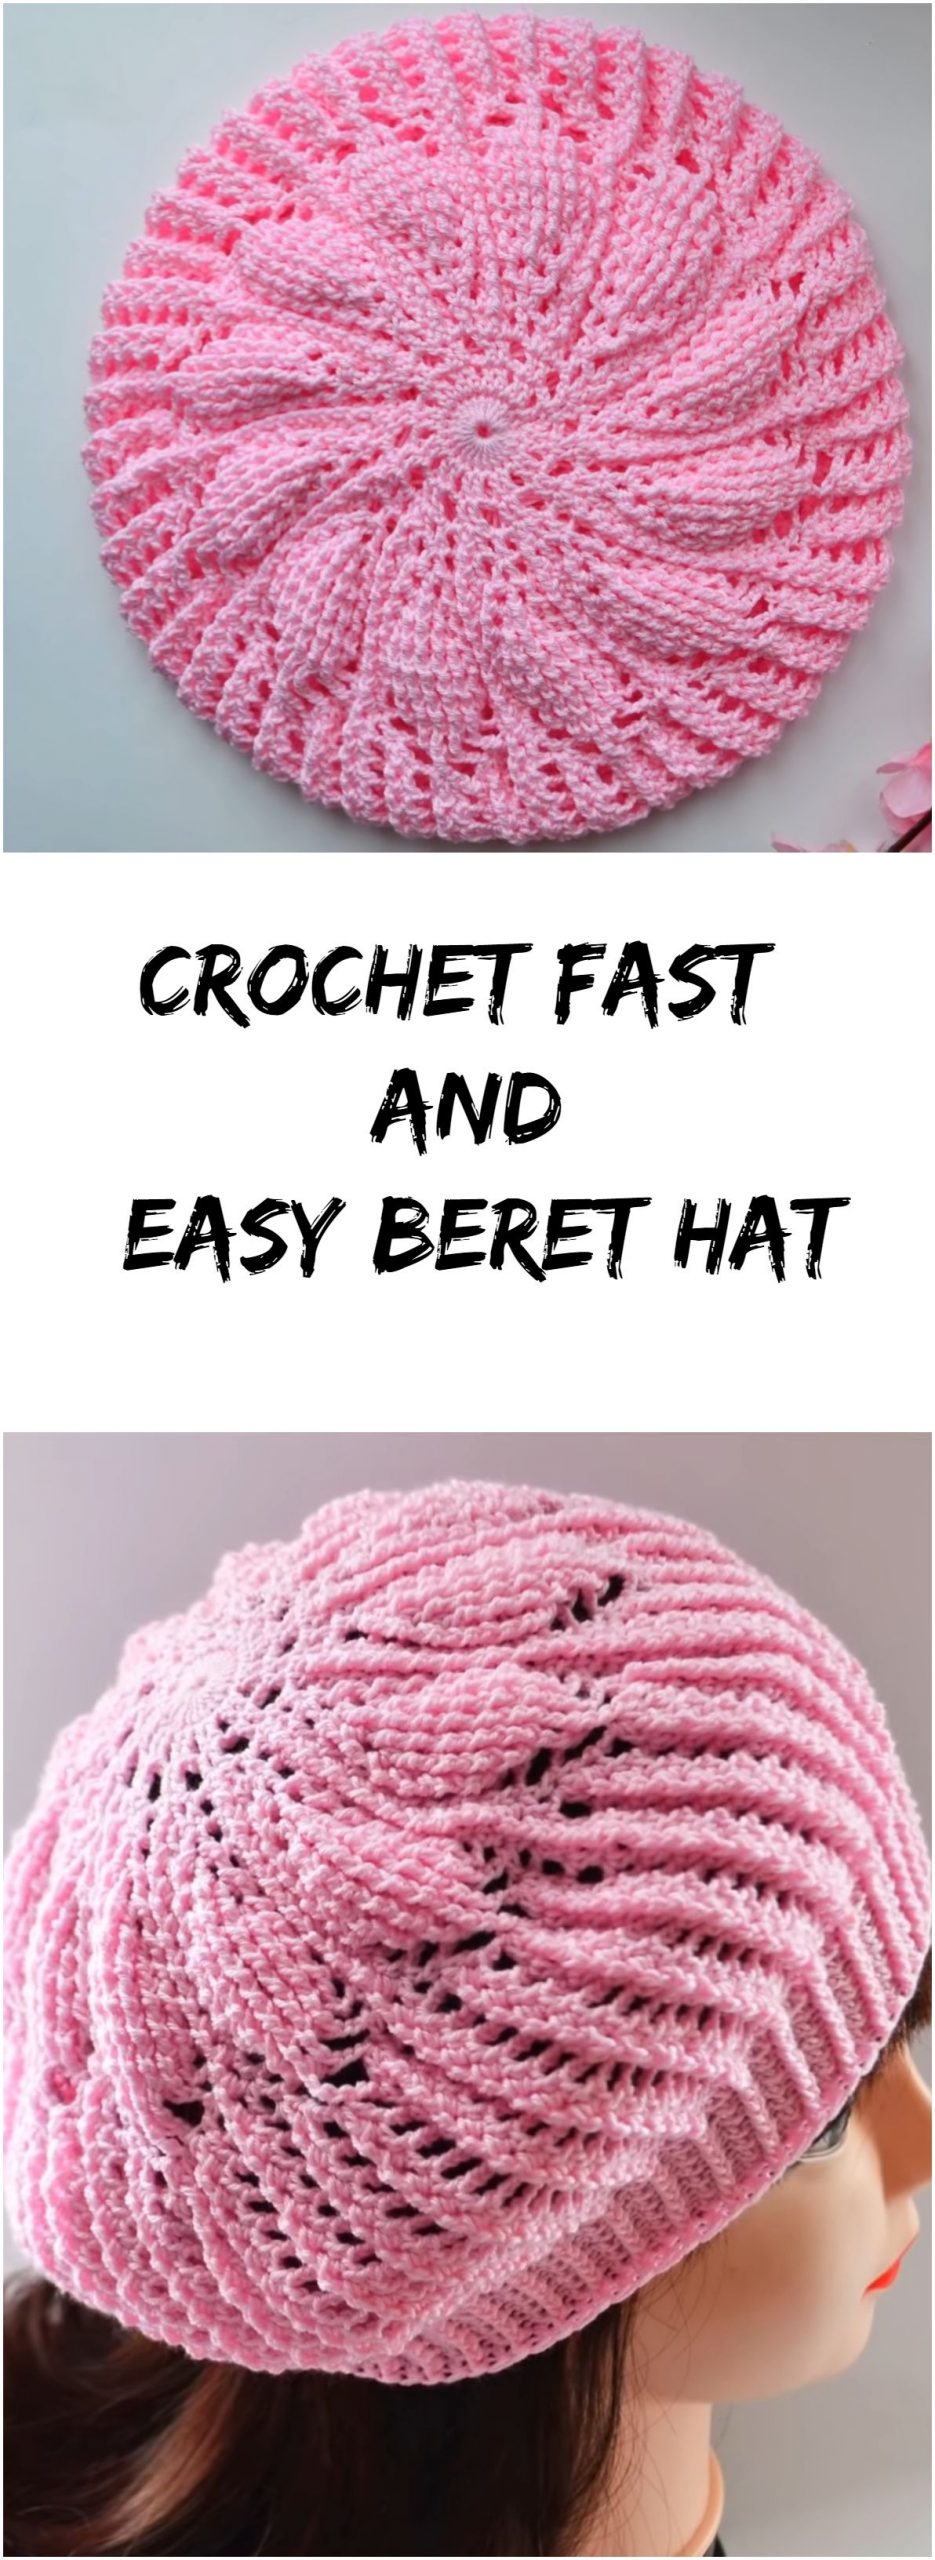 Crochet Fast And Easy Beret Hat